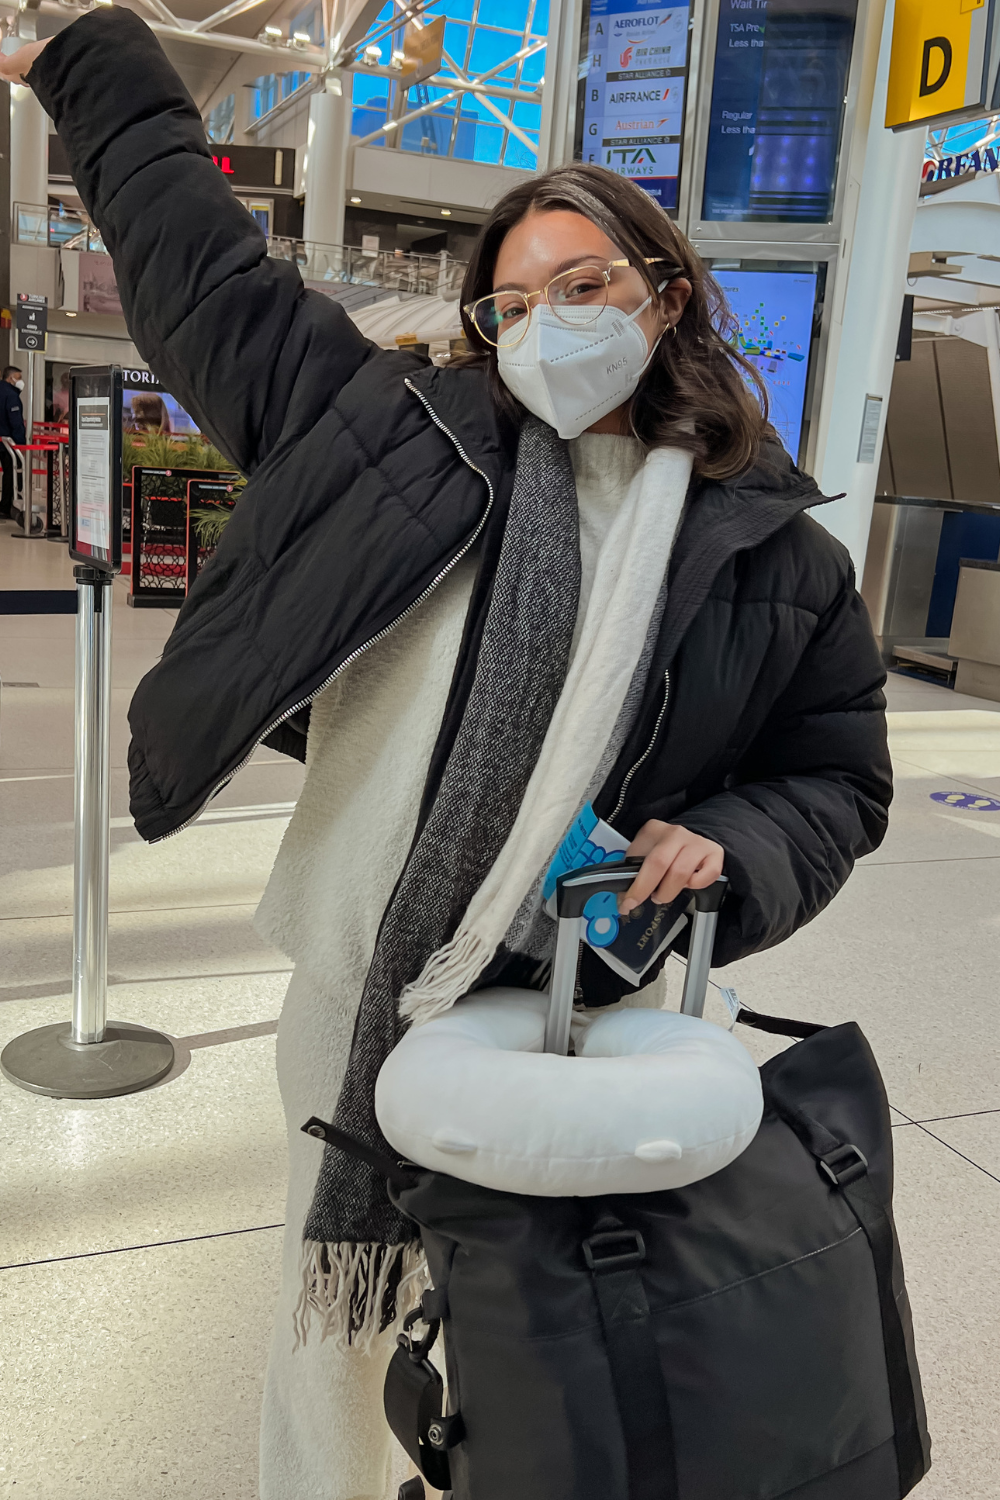 Woman with winter clothes and a mask on is in an airport holding her luggage and passport.